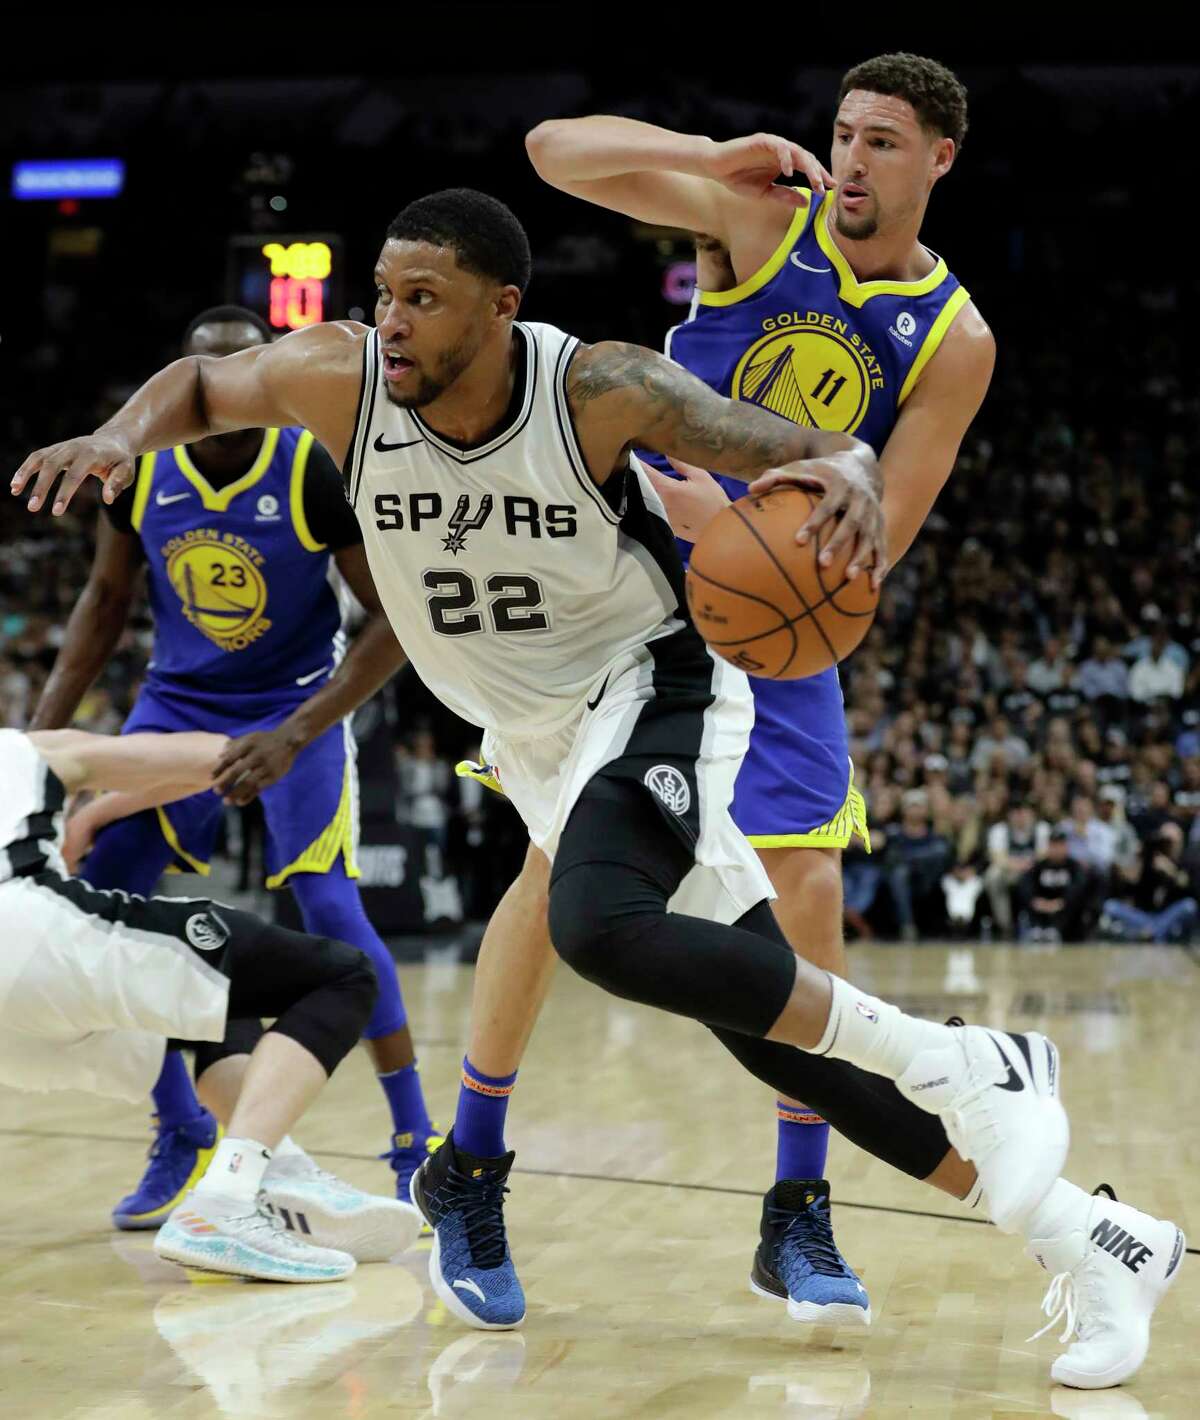 San Antonio Spurs' Rudy Gay drives to the basket past Golden State Warriors' Klay Thompson (11) during the first half of Game 3 of a first-round NBA basketball playoff series in San Antonio, Thursday, April 19, 2018. (AP Photo/Eric Gay)